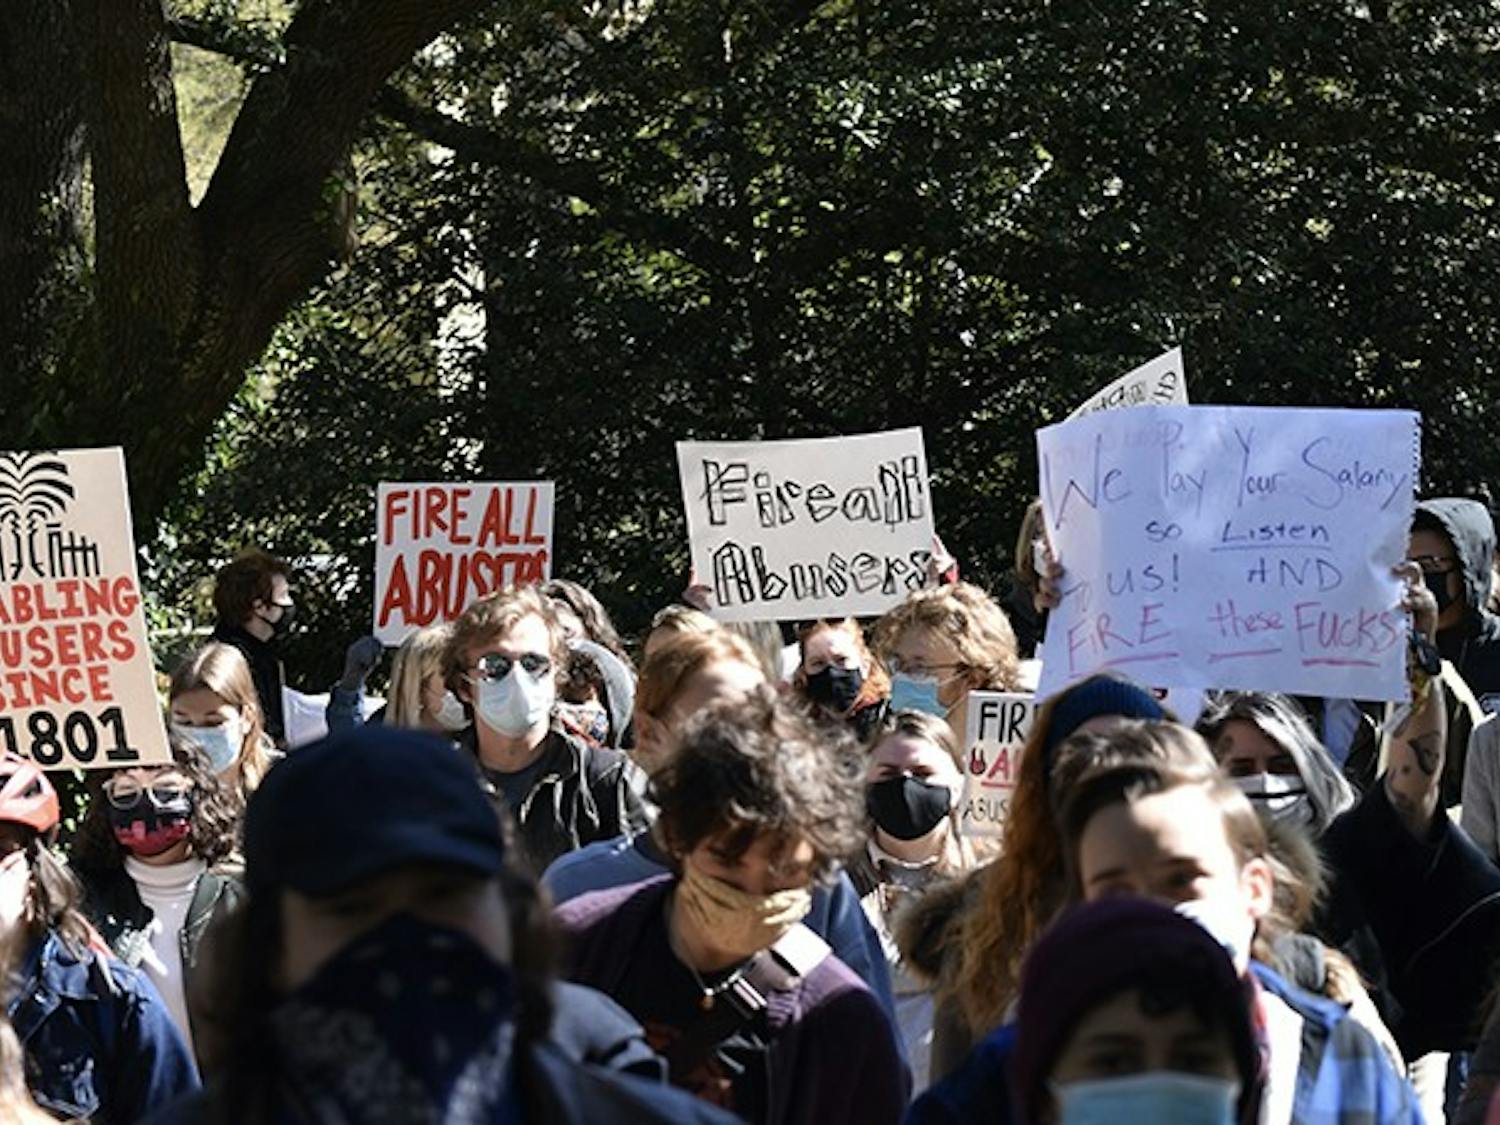 Protestors march from Pickens Street Bridge to the President's House holding signs that demand the firing of all professors accused of sexual misconduct.&nbsp;